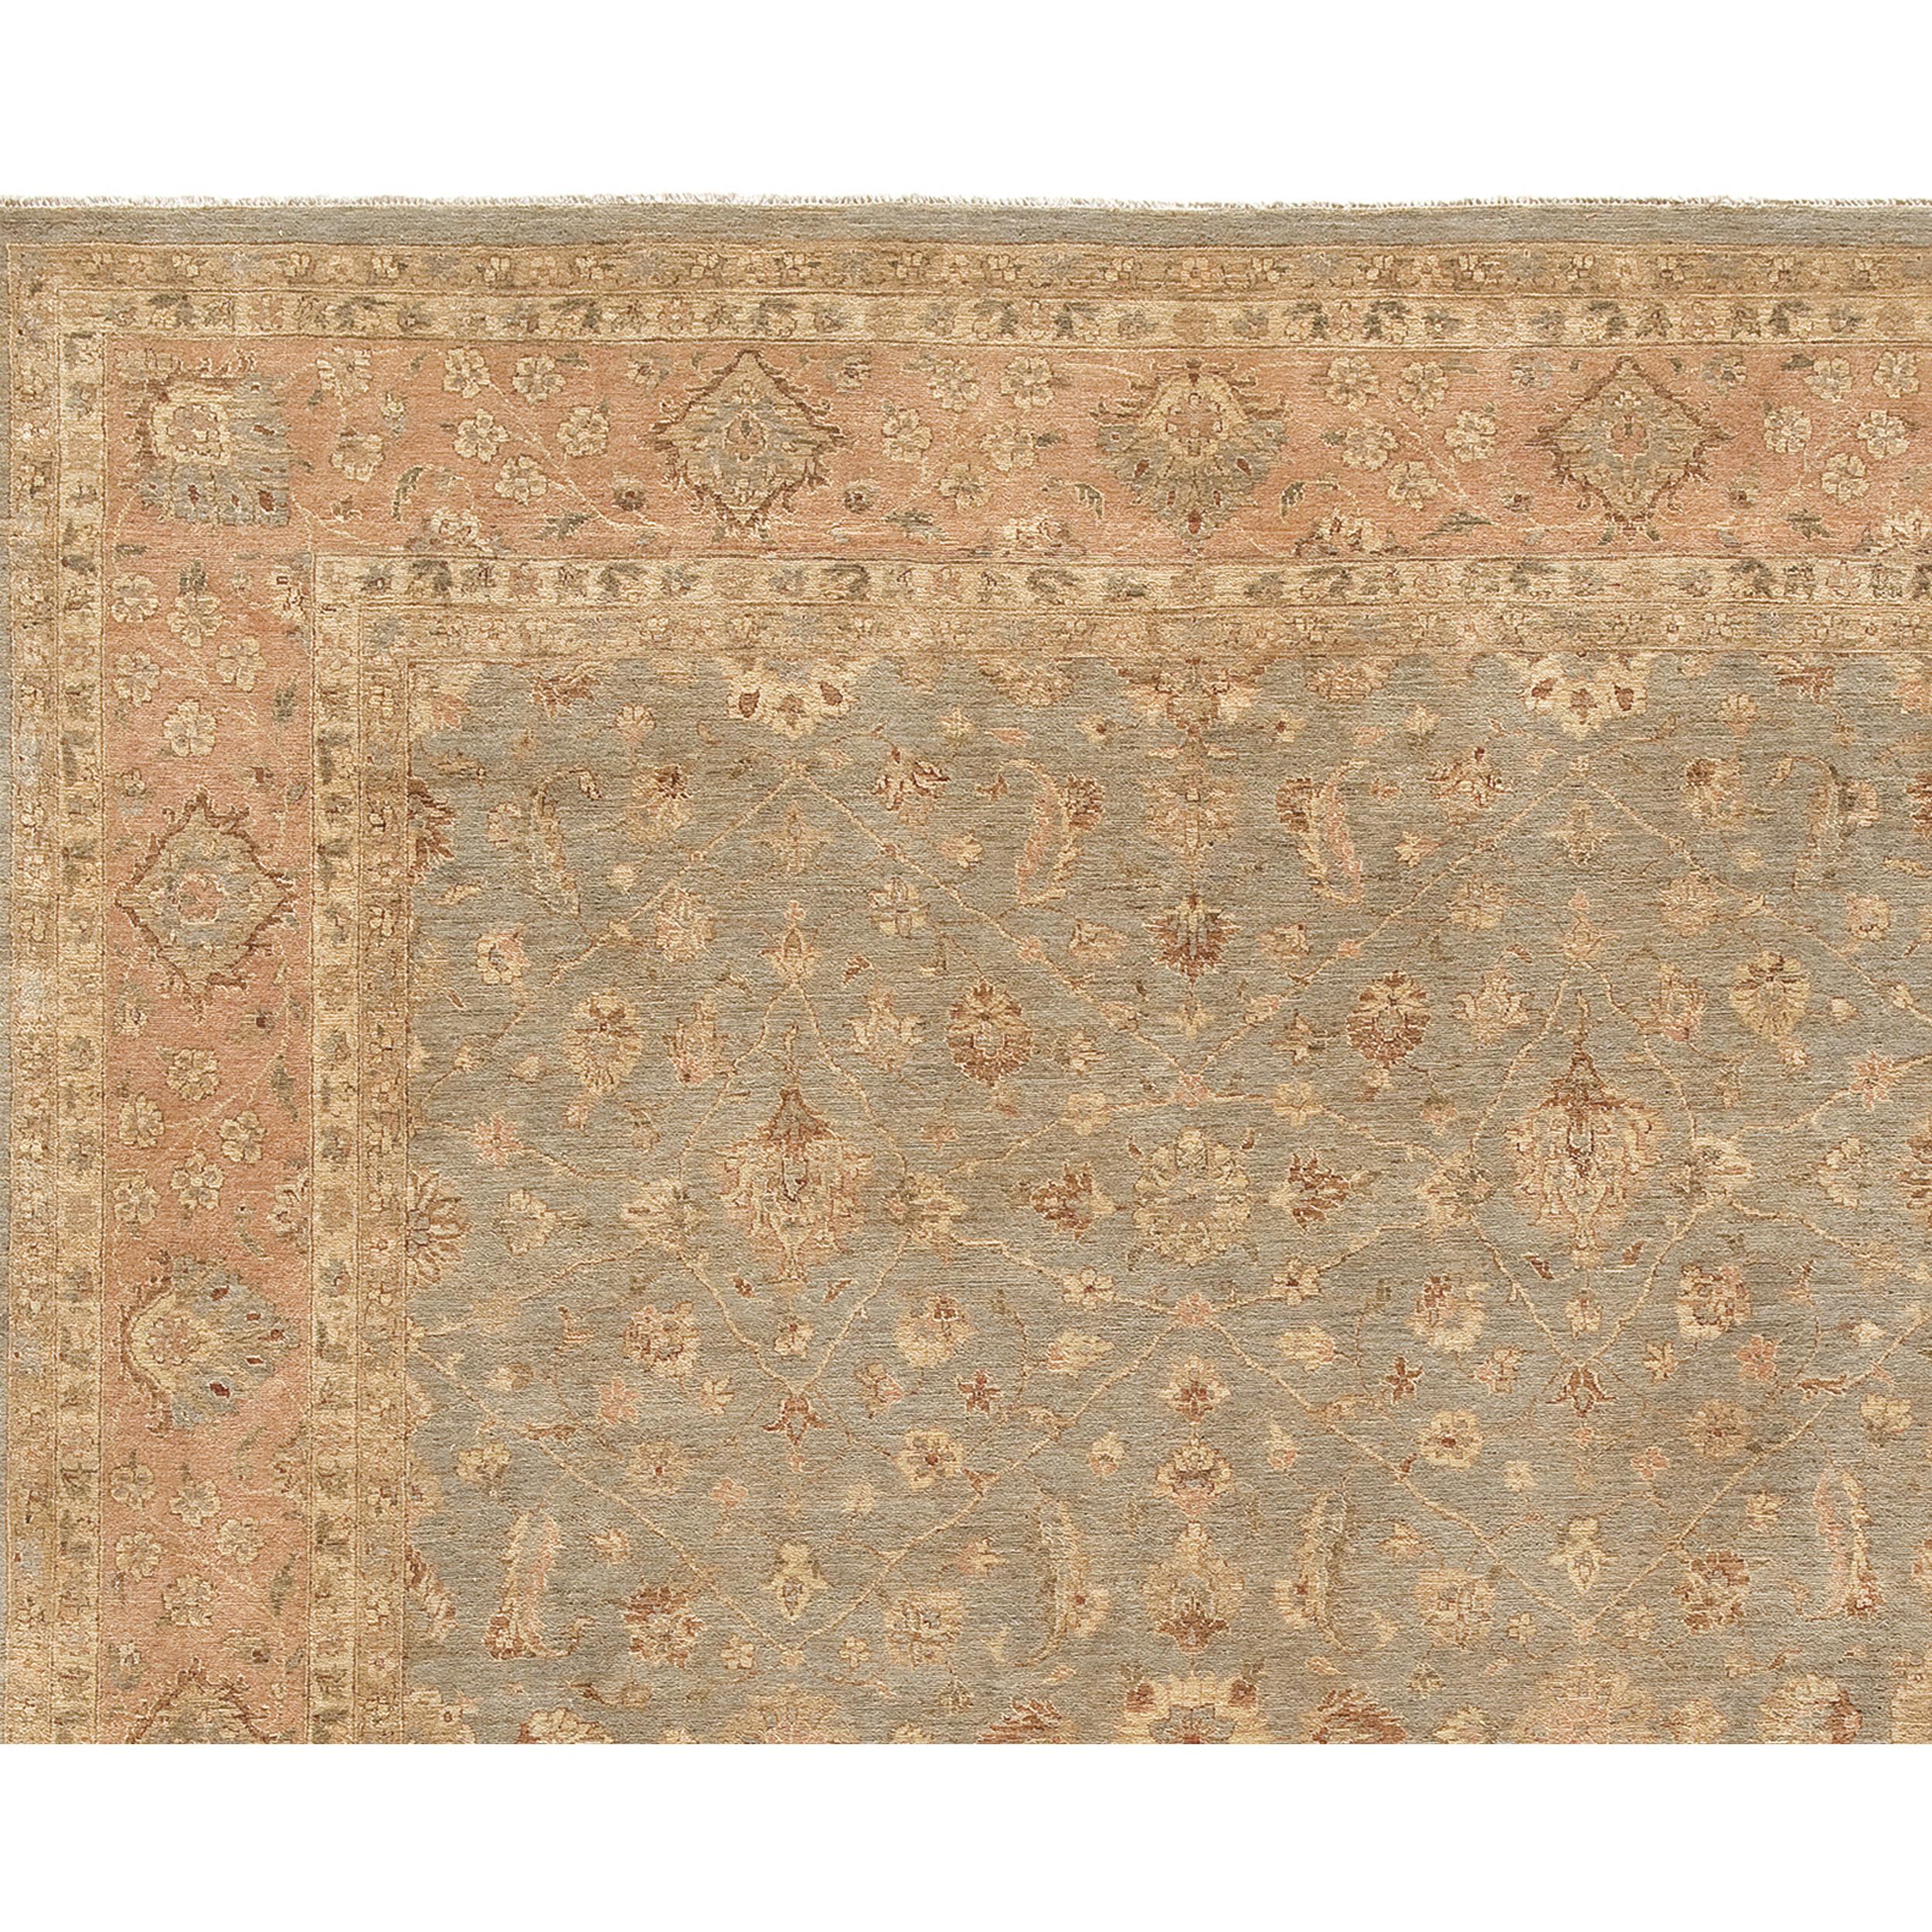 Luxury Traditional Hand-Knotted Polonaise Silver and Coral 12x18 Rug In New Condition For Sale In Secaucus, NJ